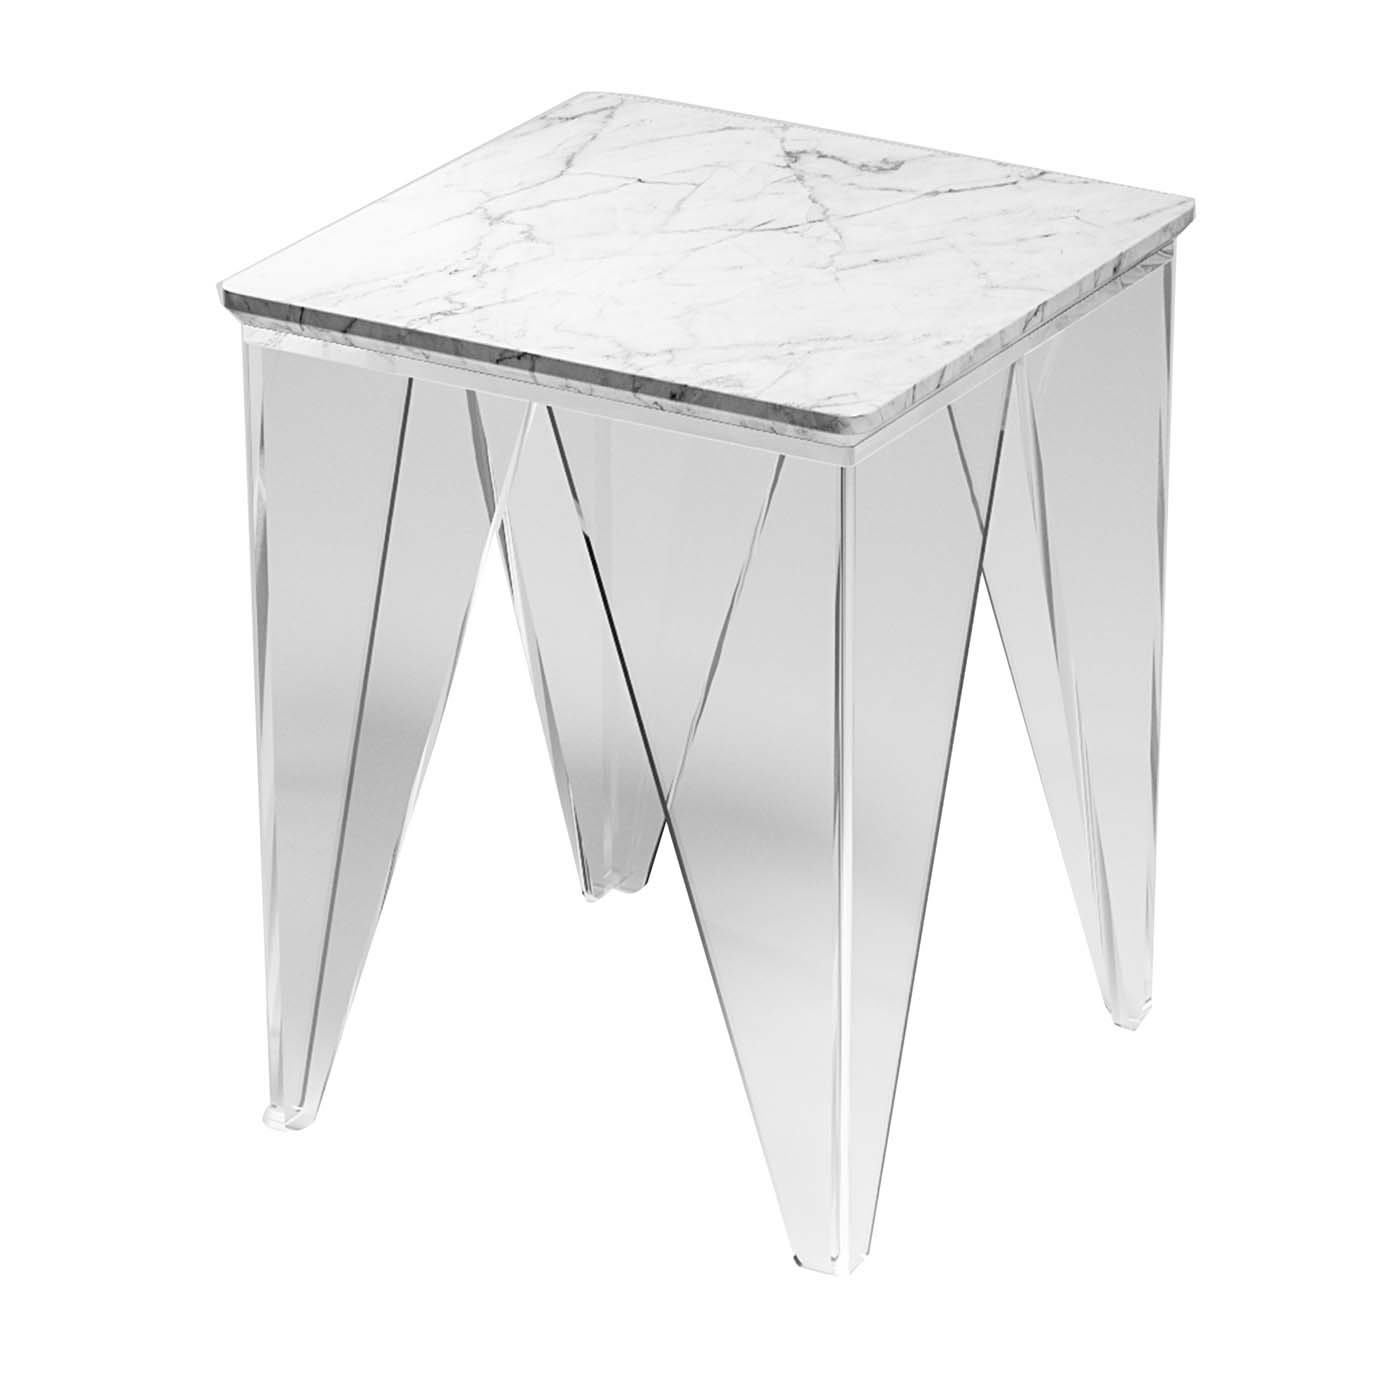 Vein Side Table with White Carrara Marble Top - Madea Milano